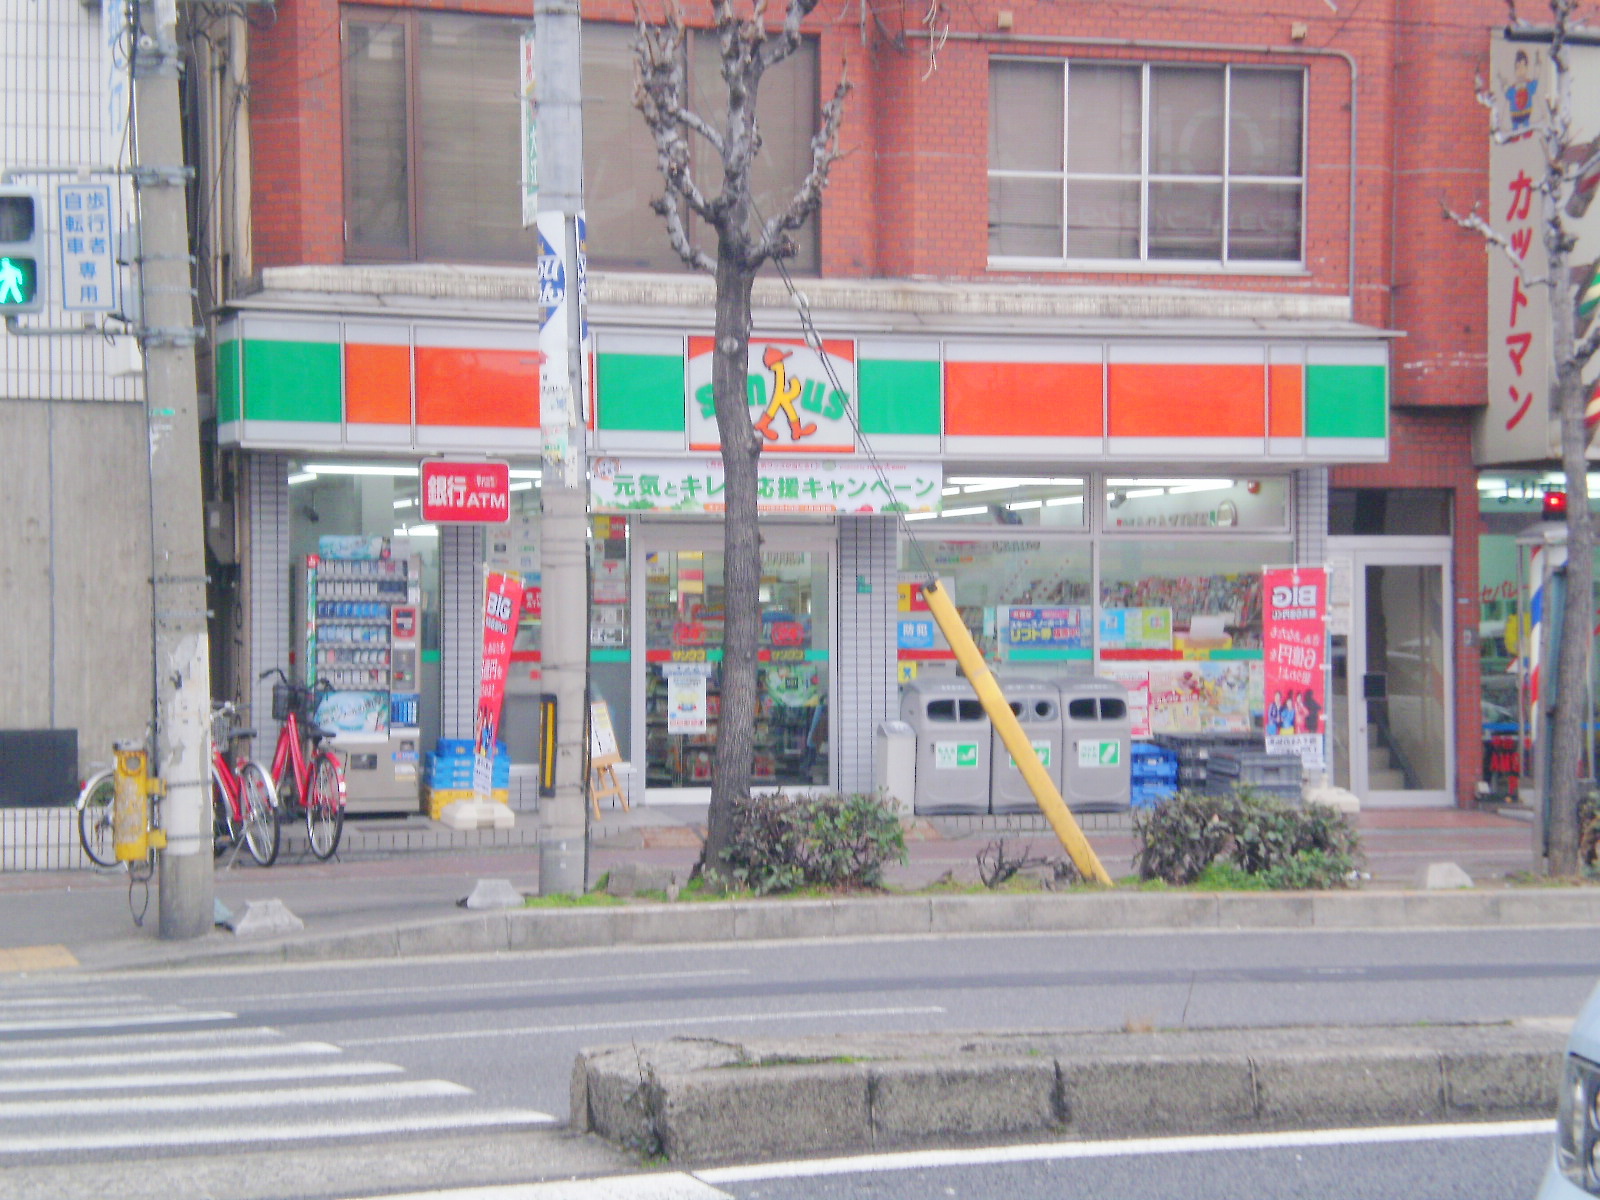 Convenience store. 88m until Thanksgiving Kire 2-chome (convenience store)